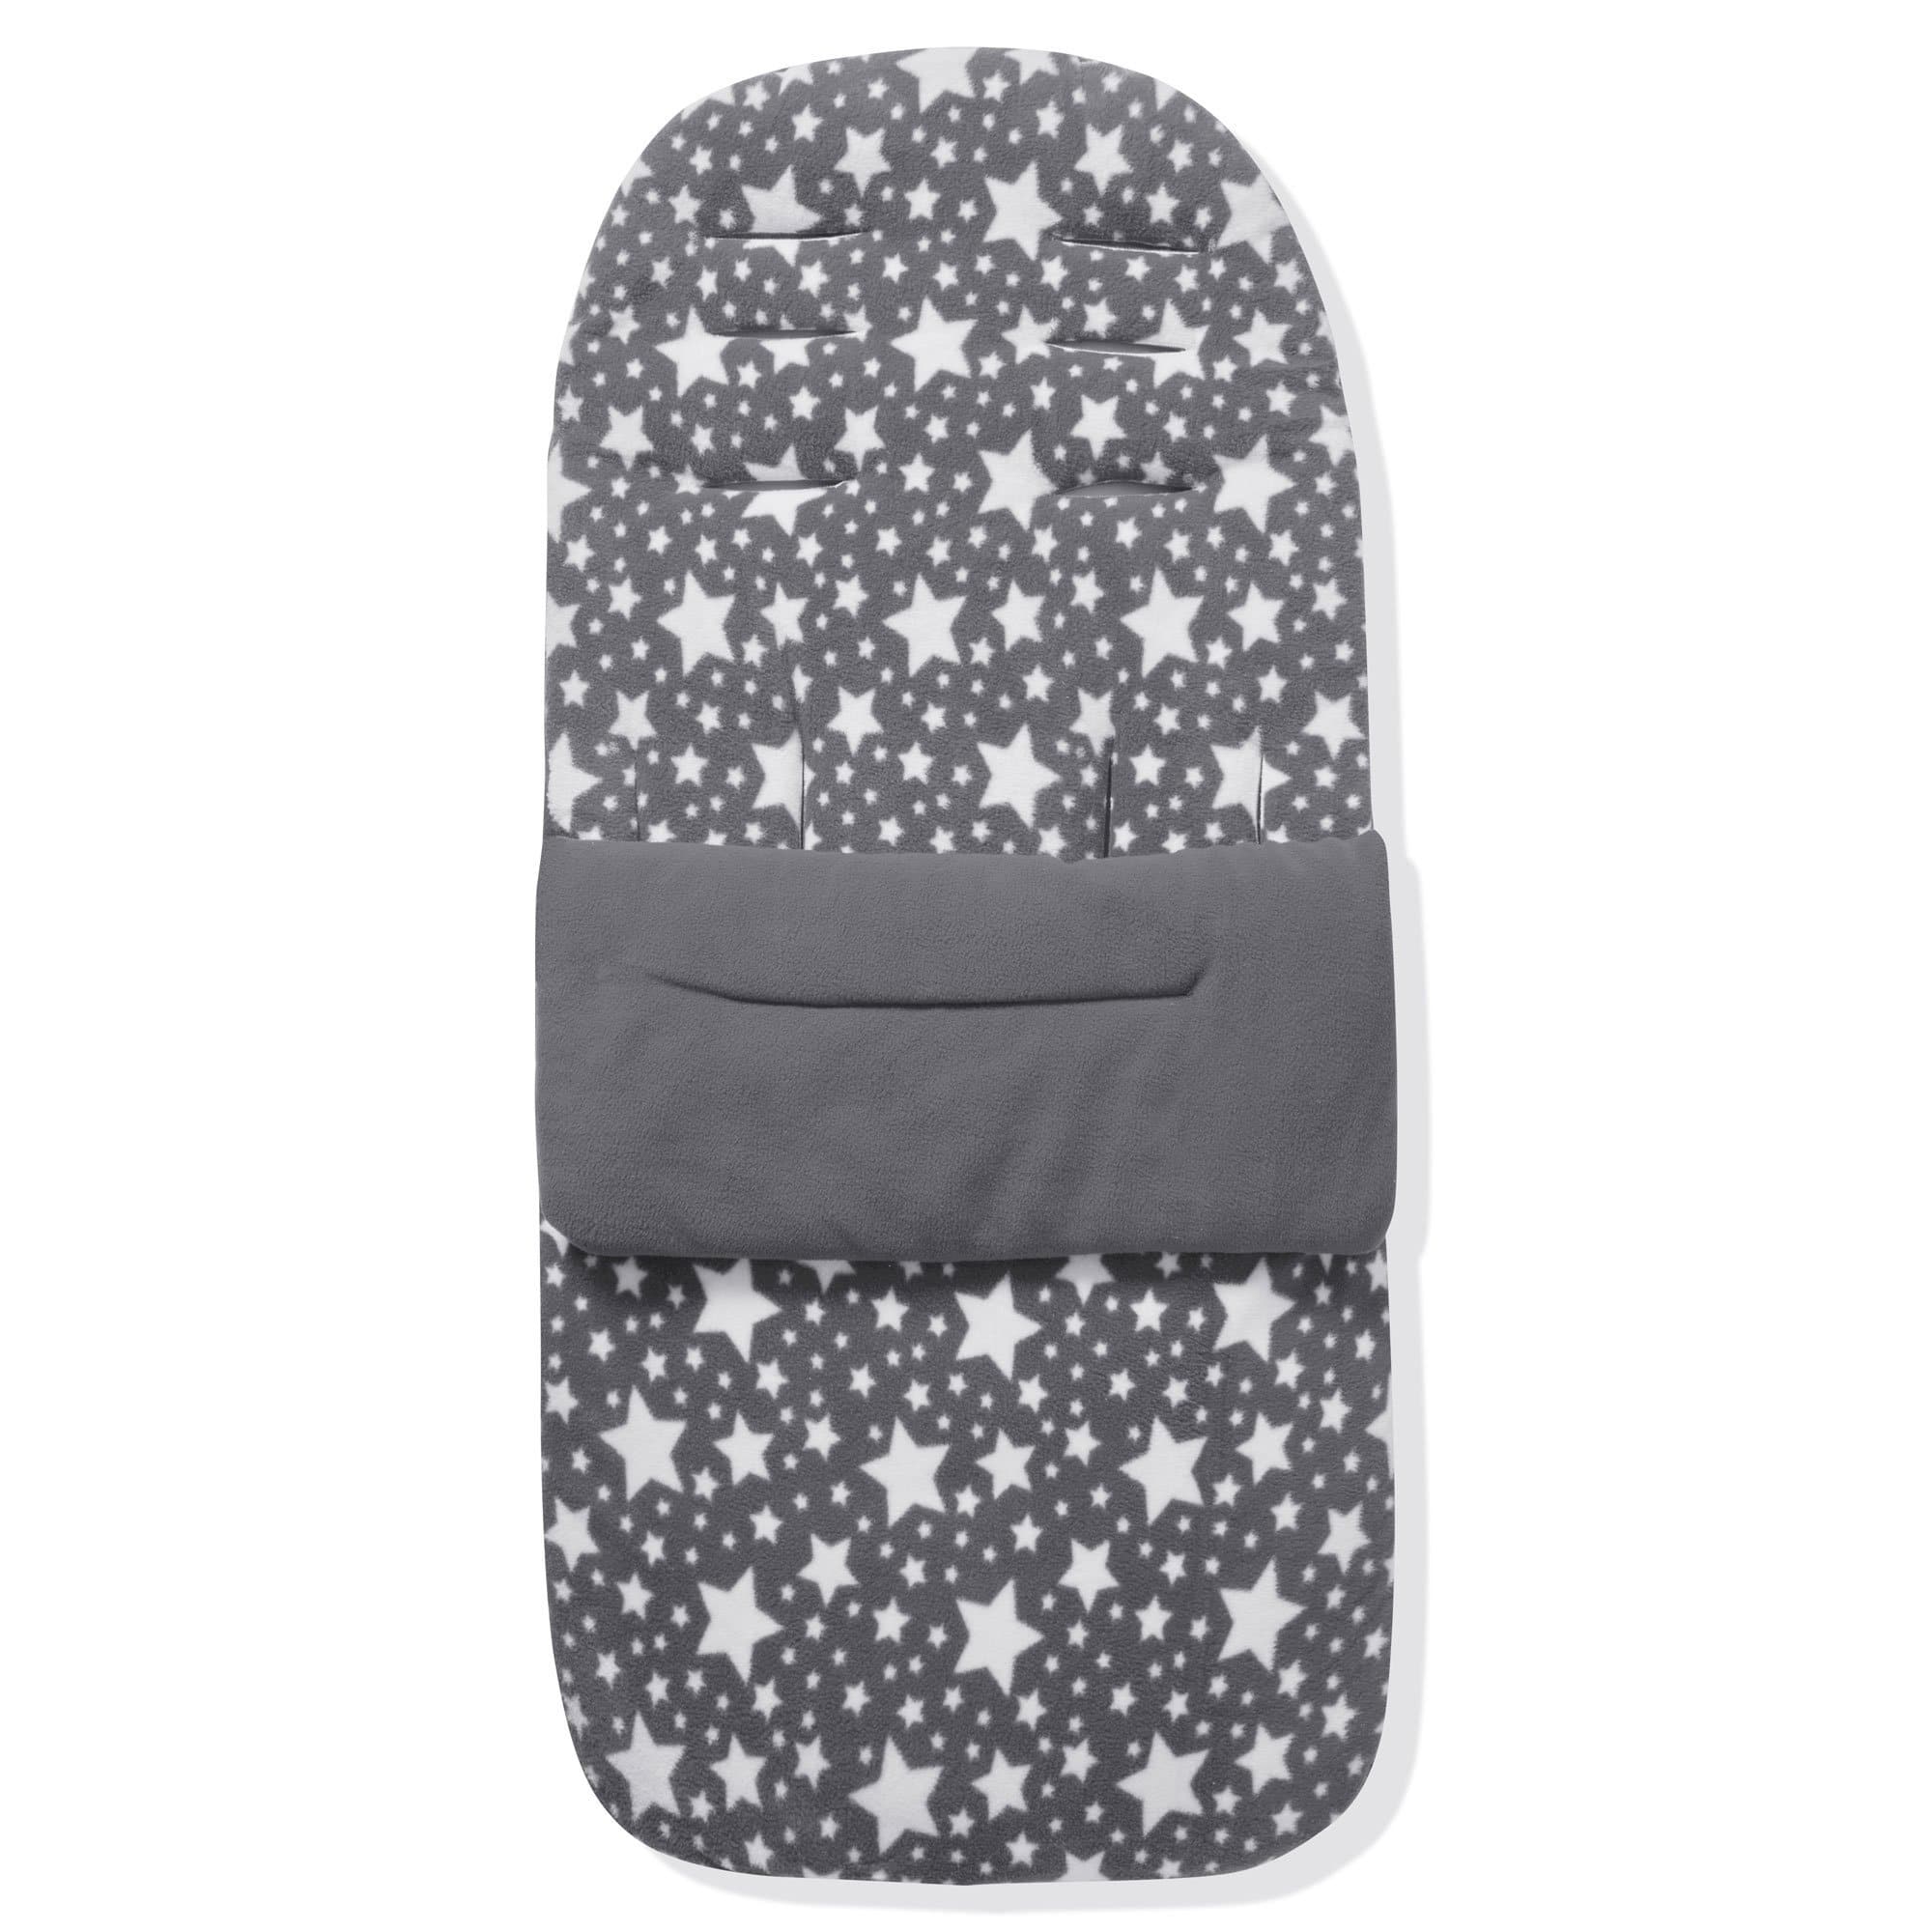 Fleece Footmuff / Cosy Toes Compatible with Nuna - Grey Star / Fits All Models | For Your Little One